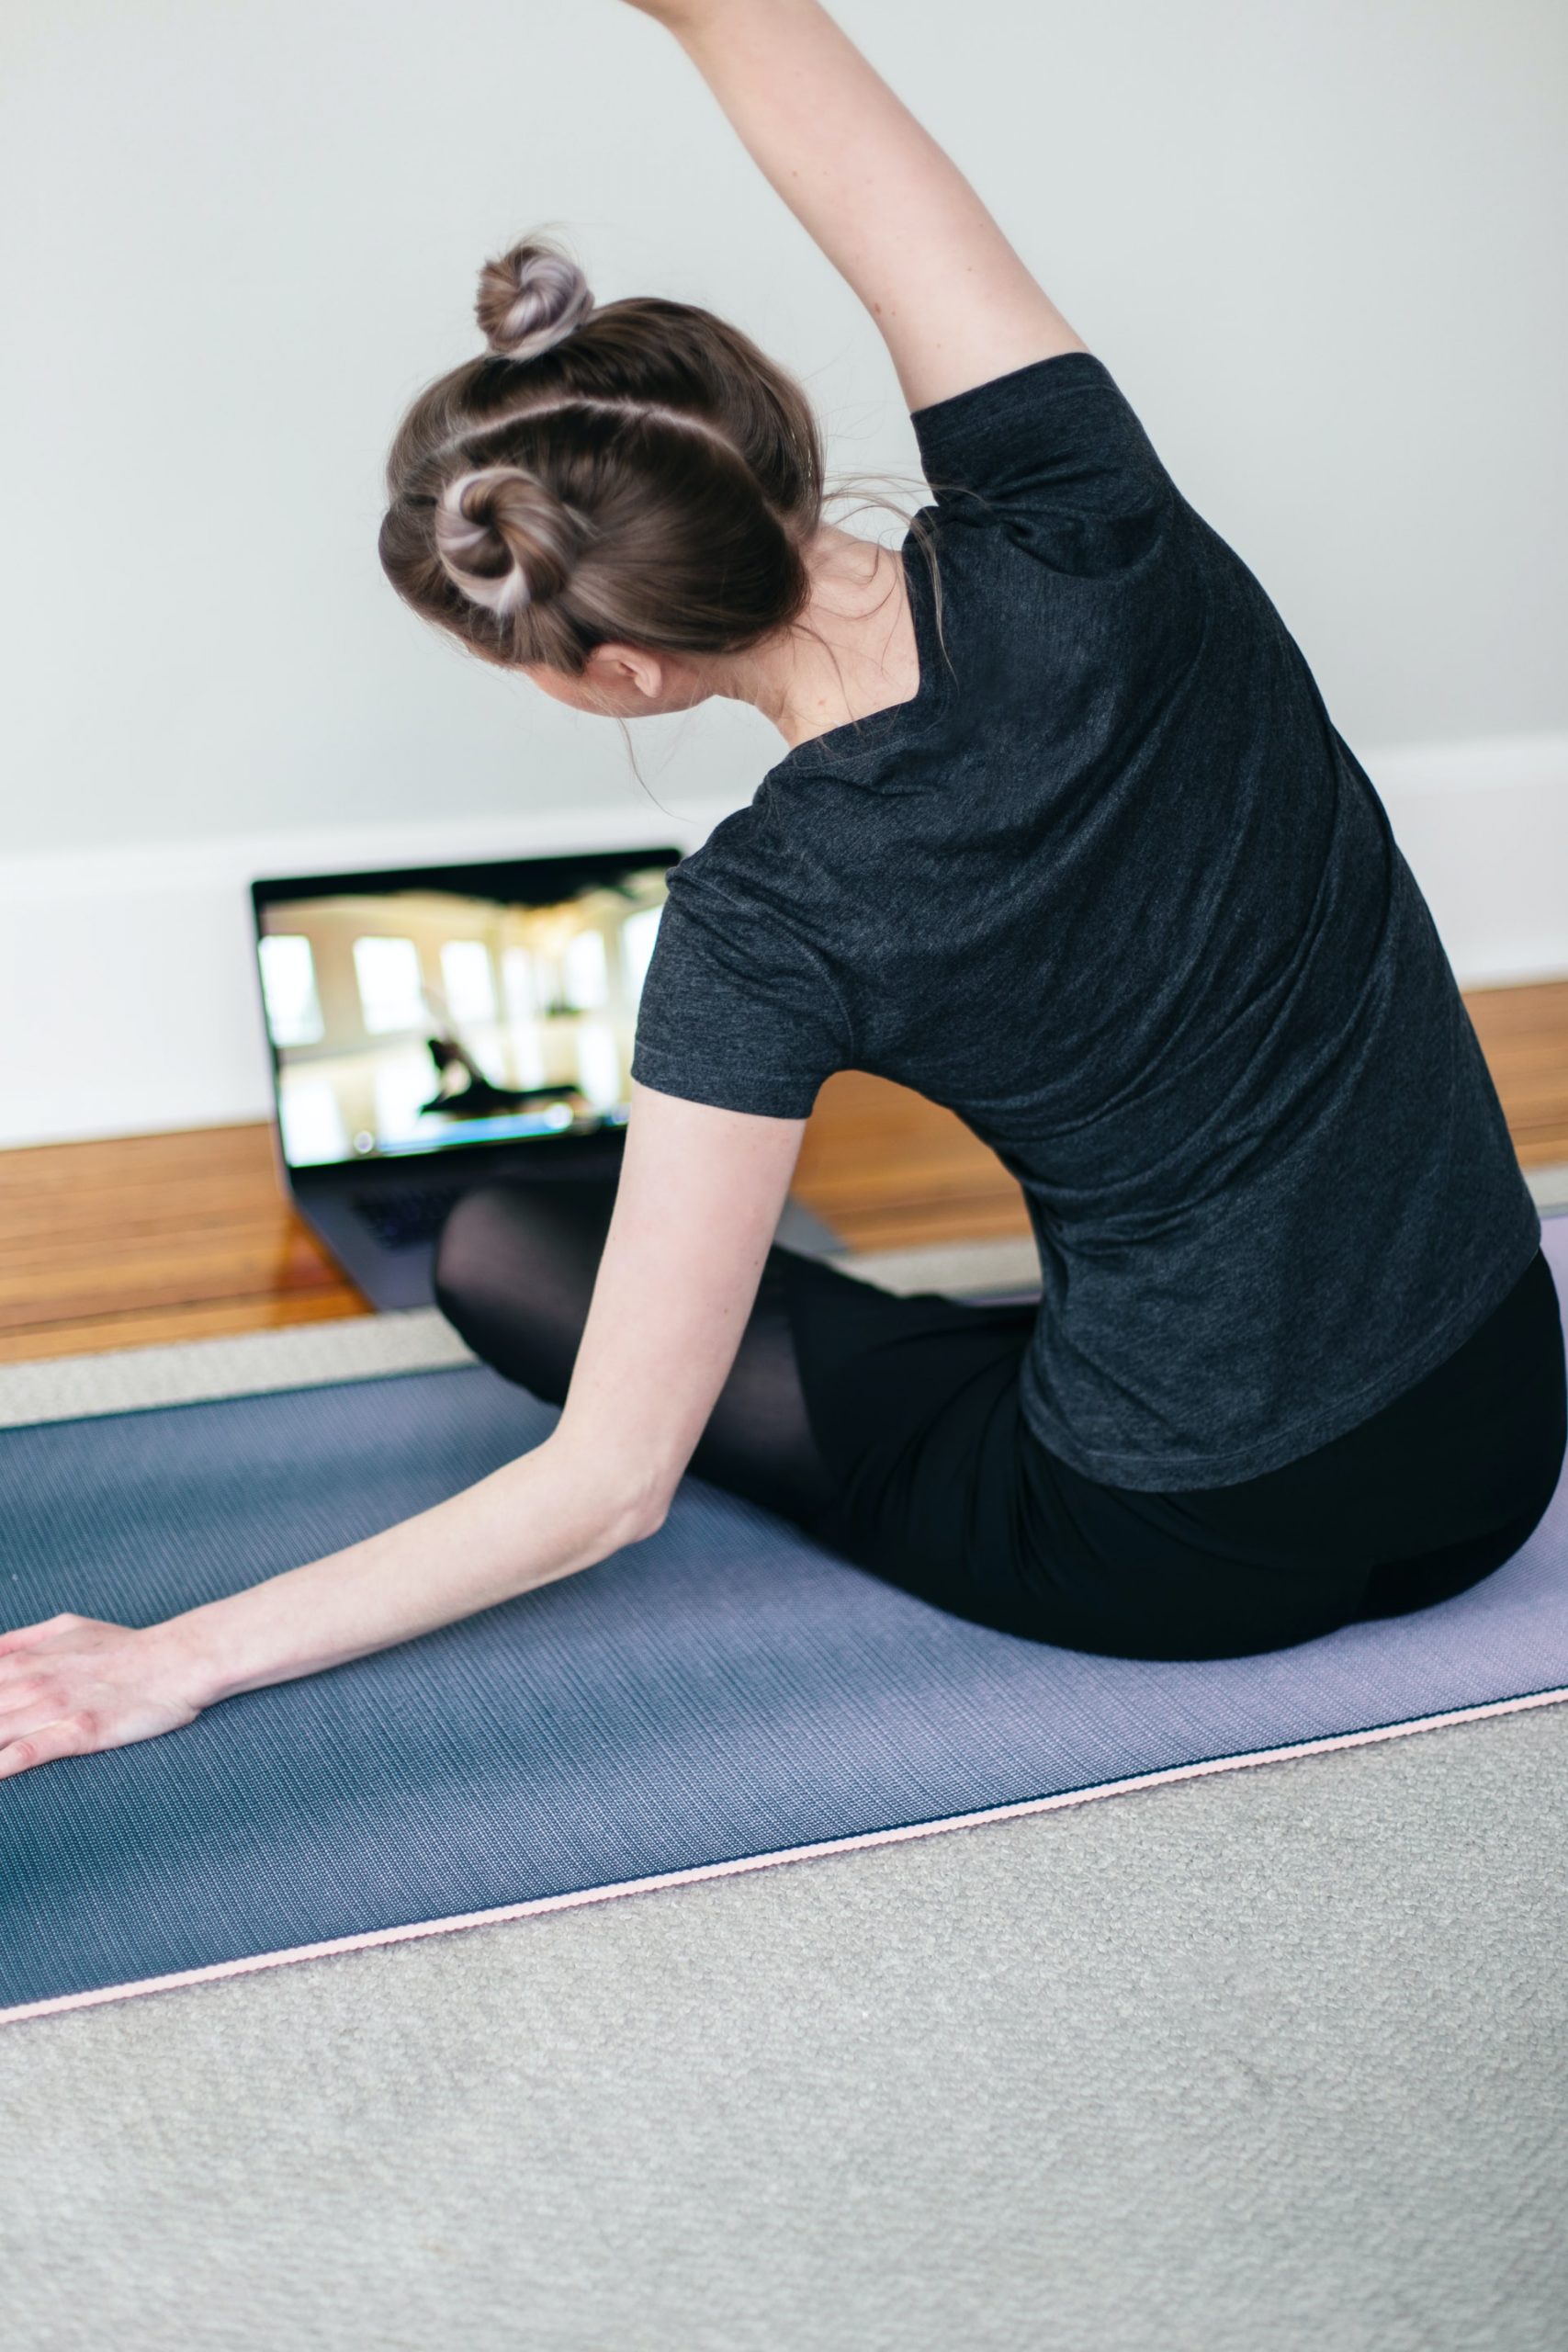 How to start practicing yoga at home?